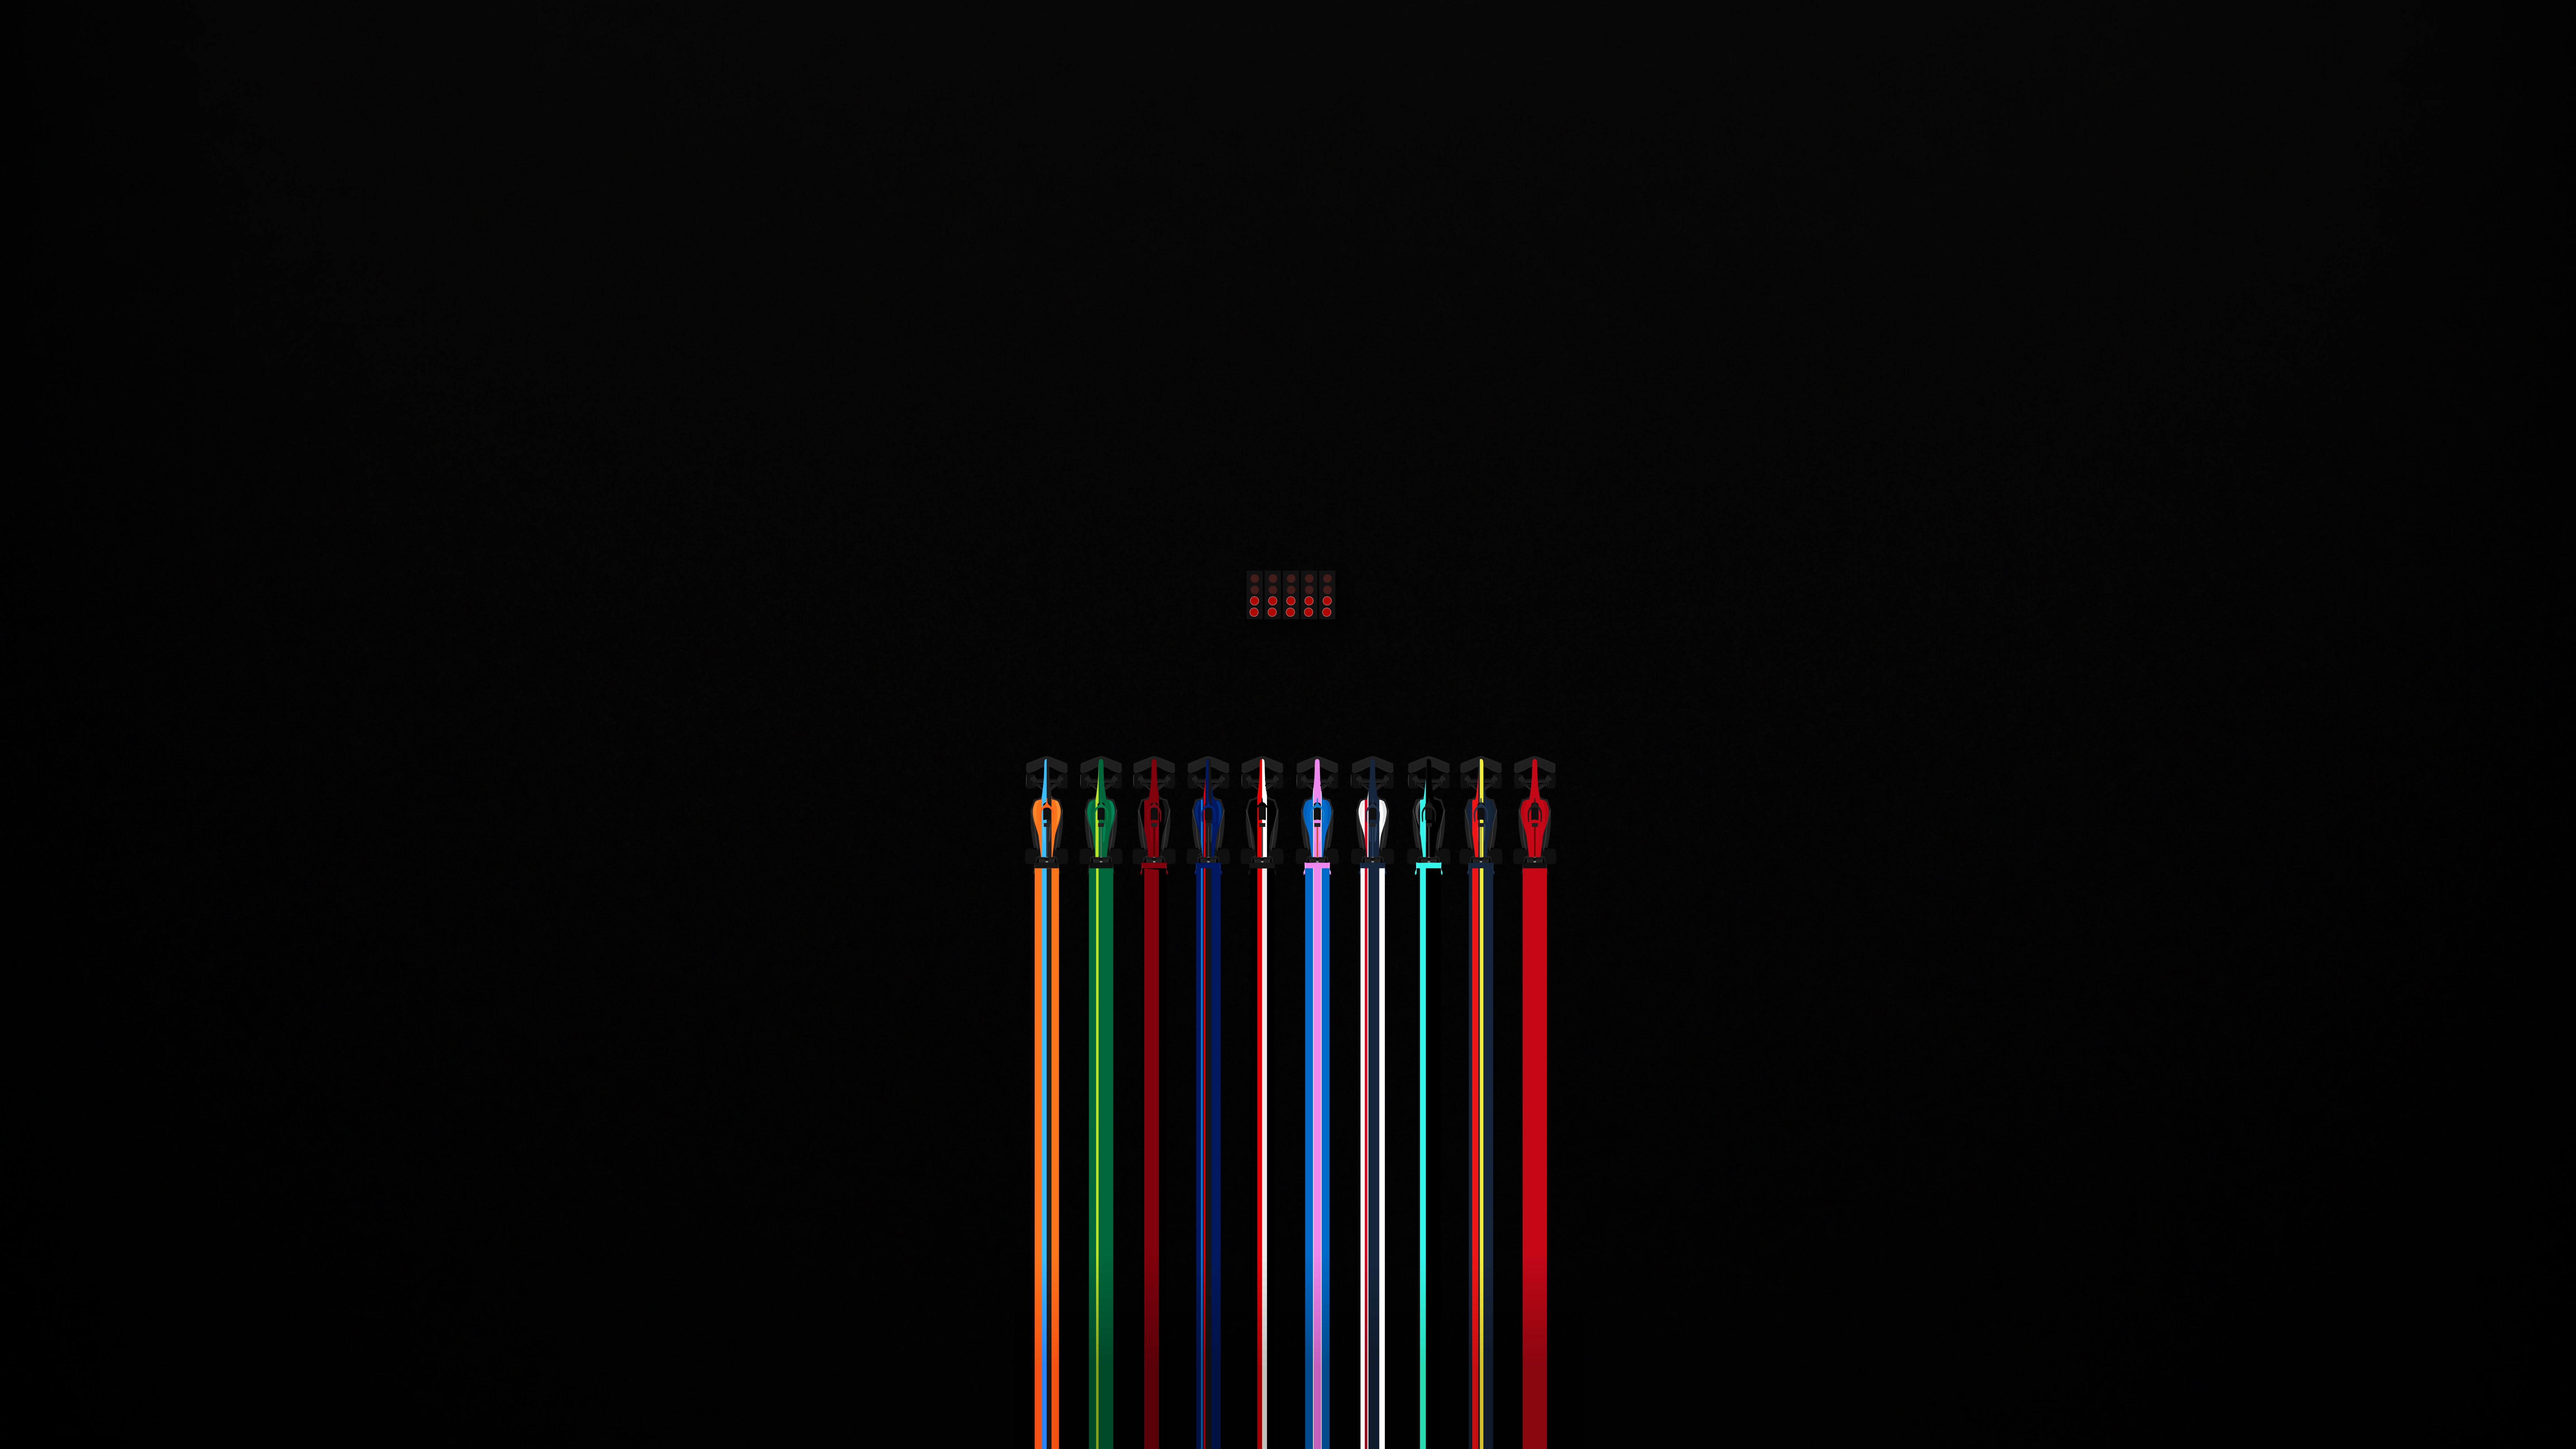 2023 F1 Minimalist Wallpaper (Links To Better Quality Tall Wide Sizes In Comments)